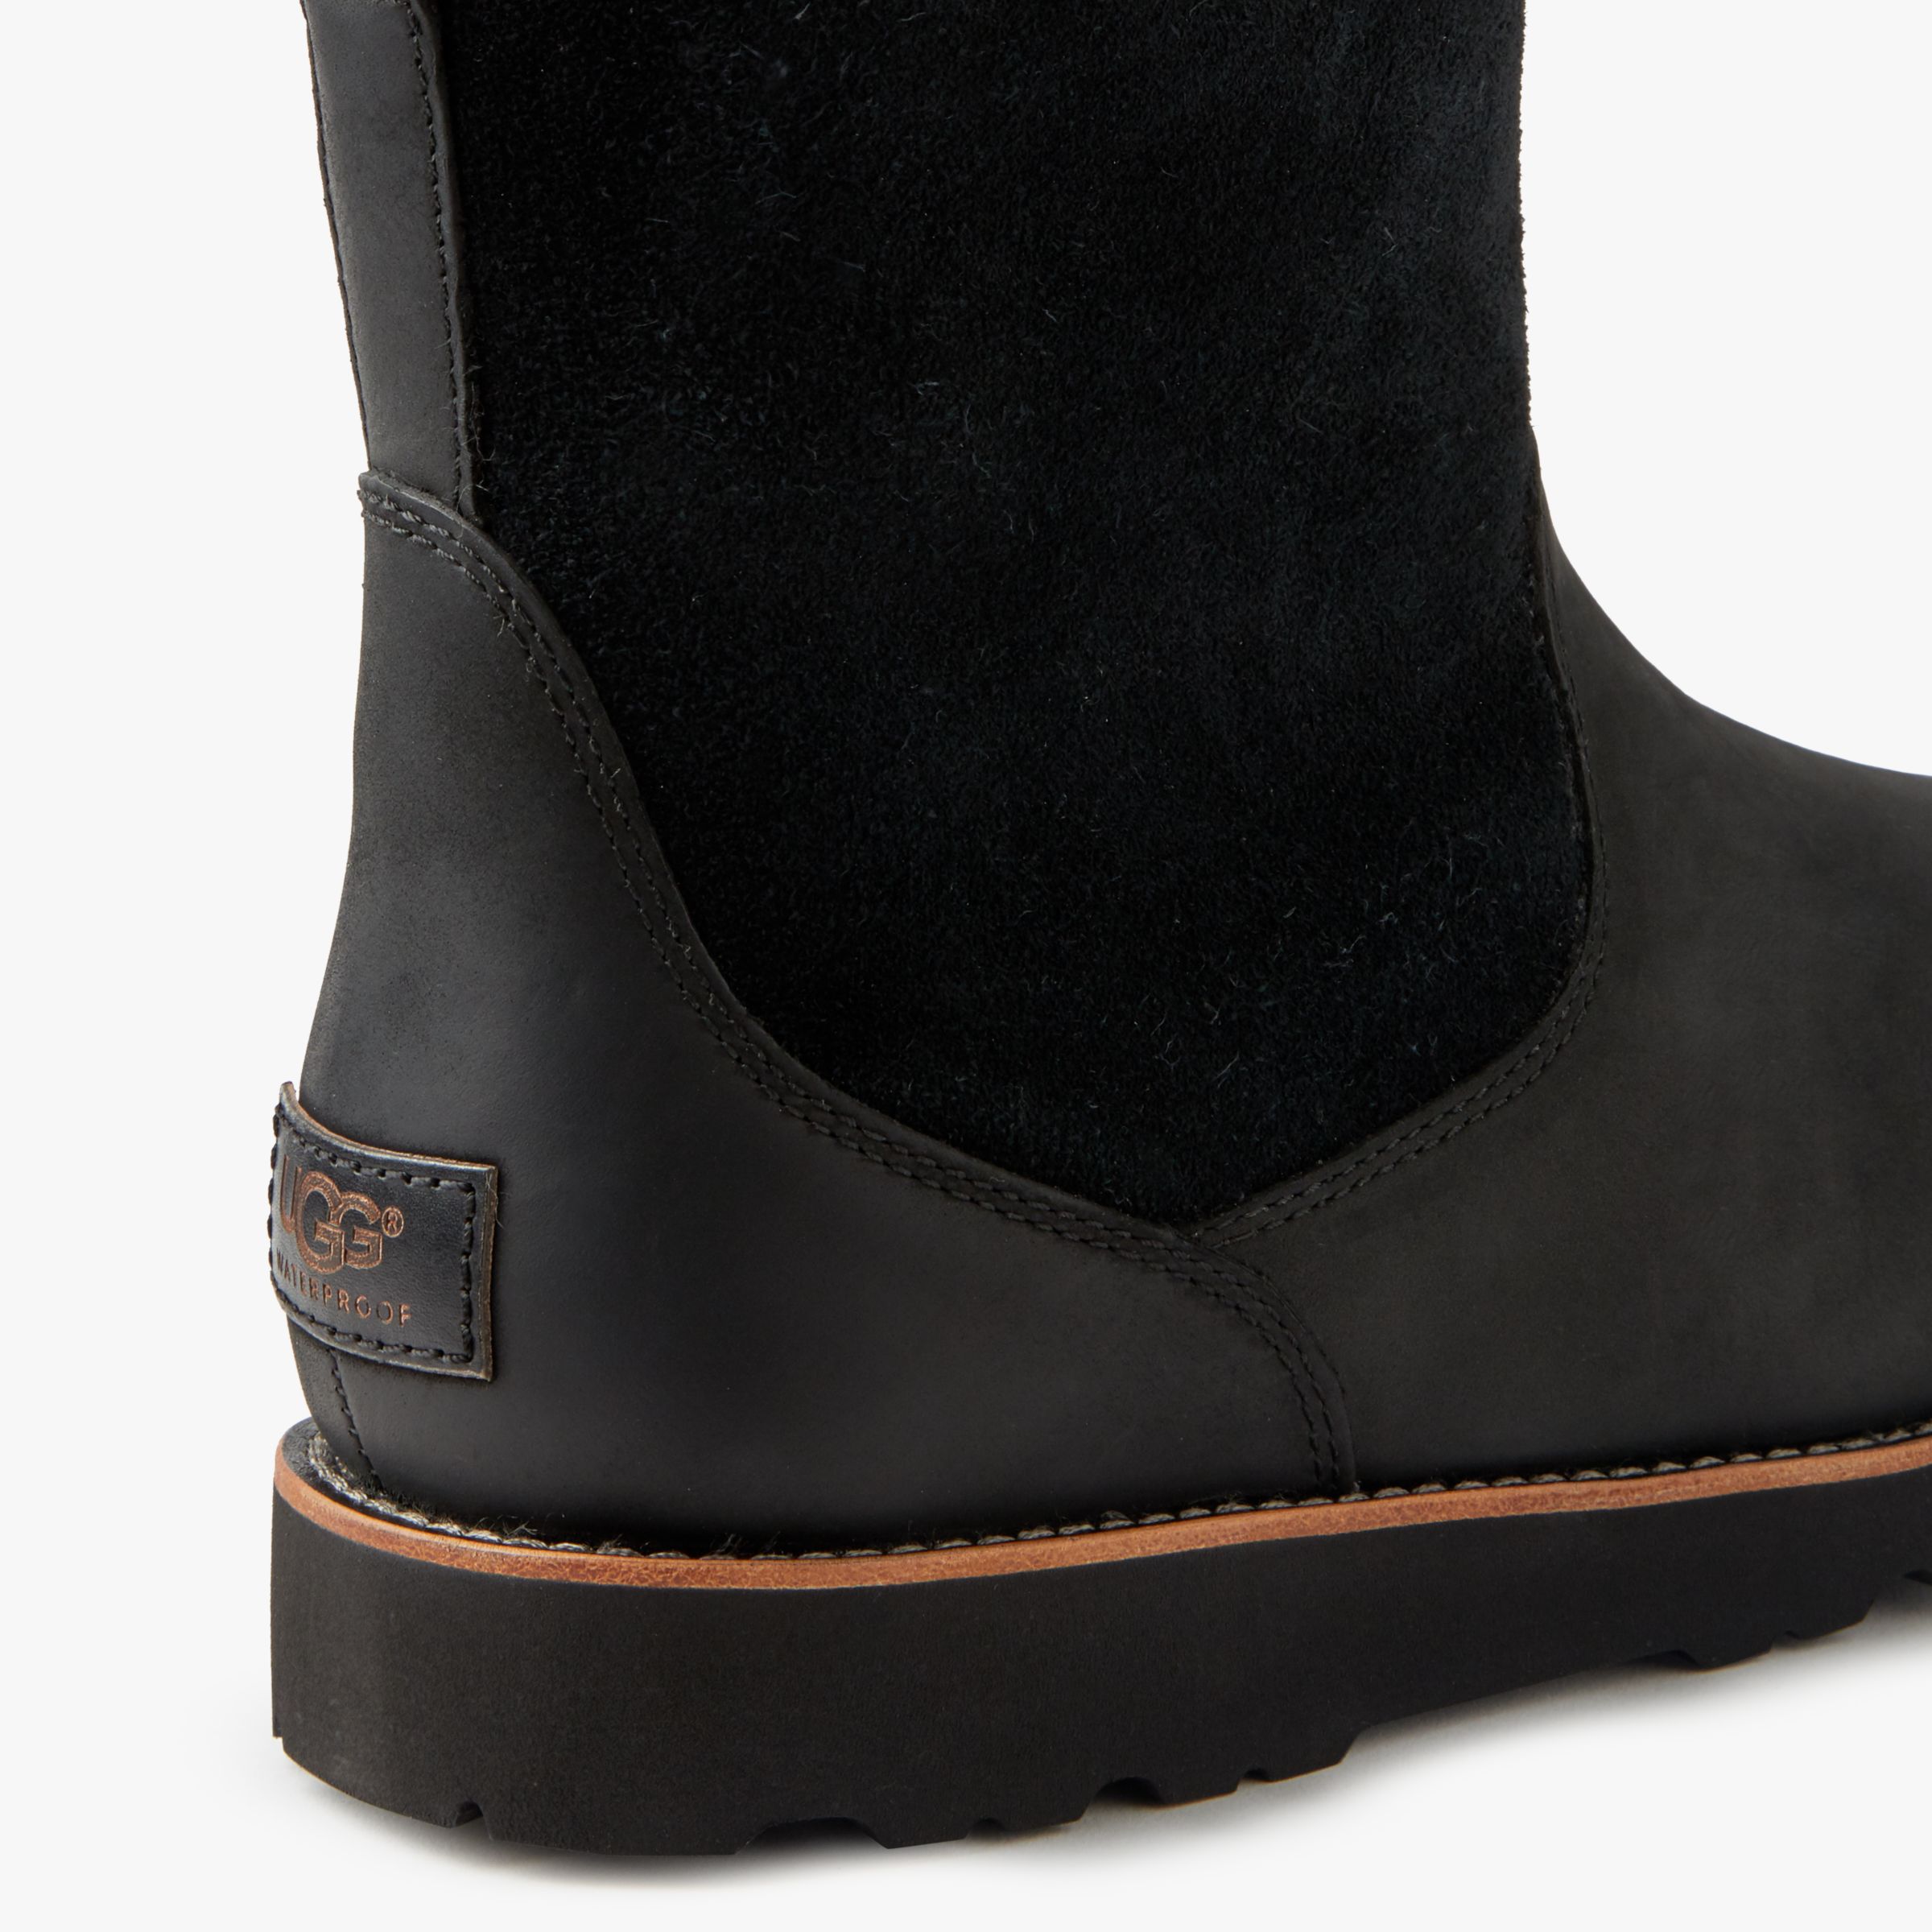 water resistant ugg boots